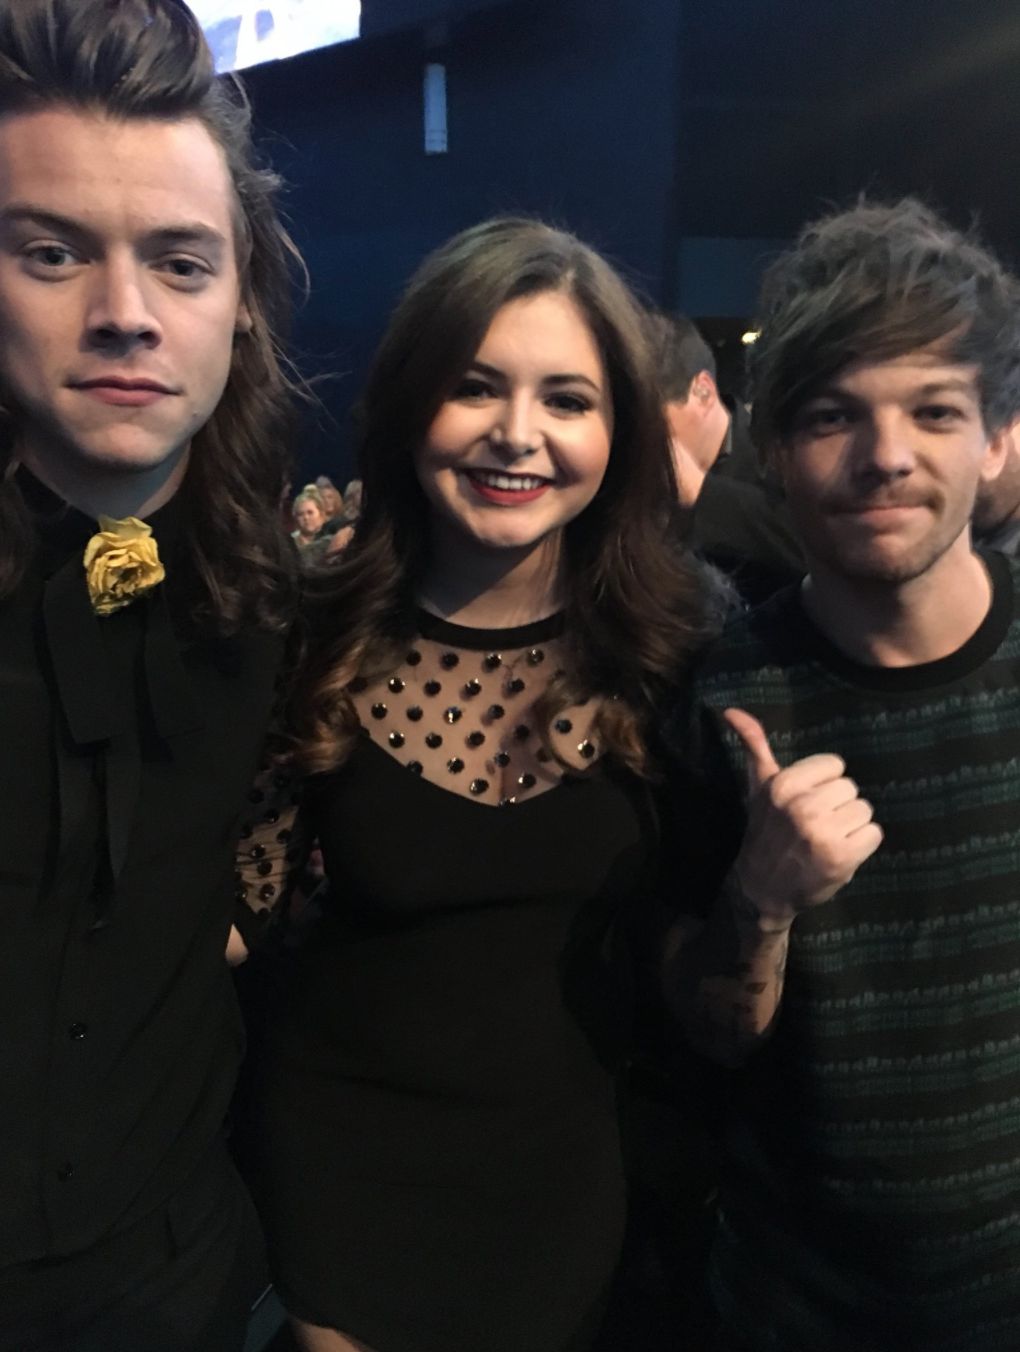 Claudia meeting One Direction's Harry and Louis